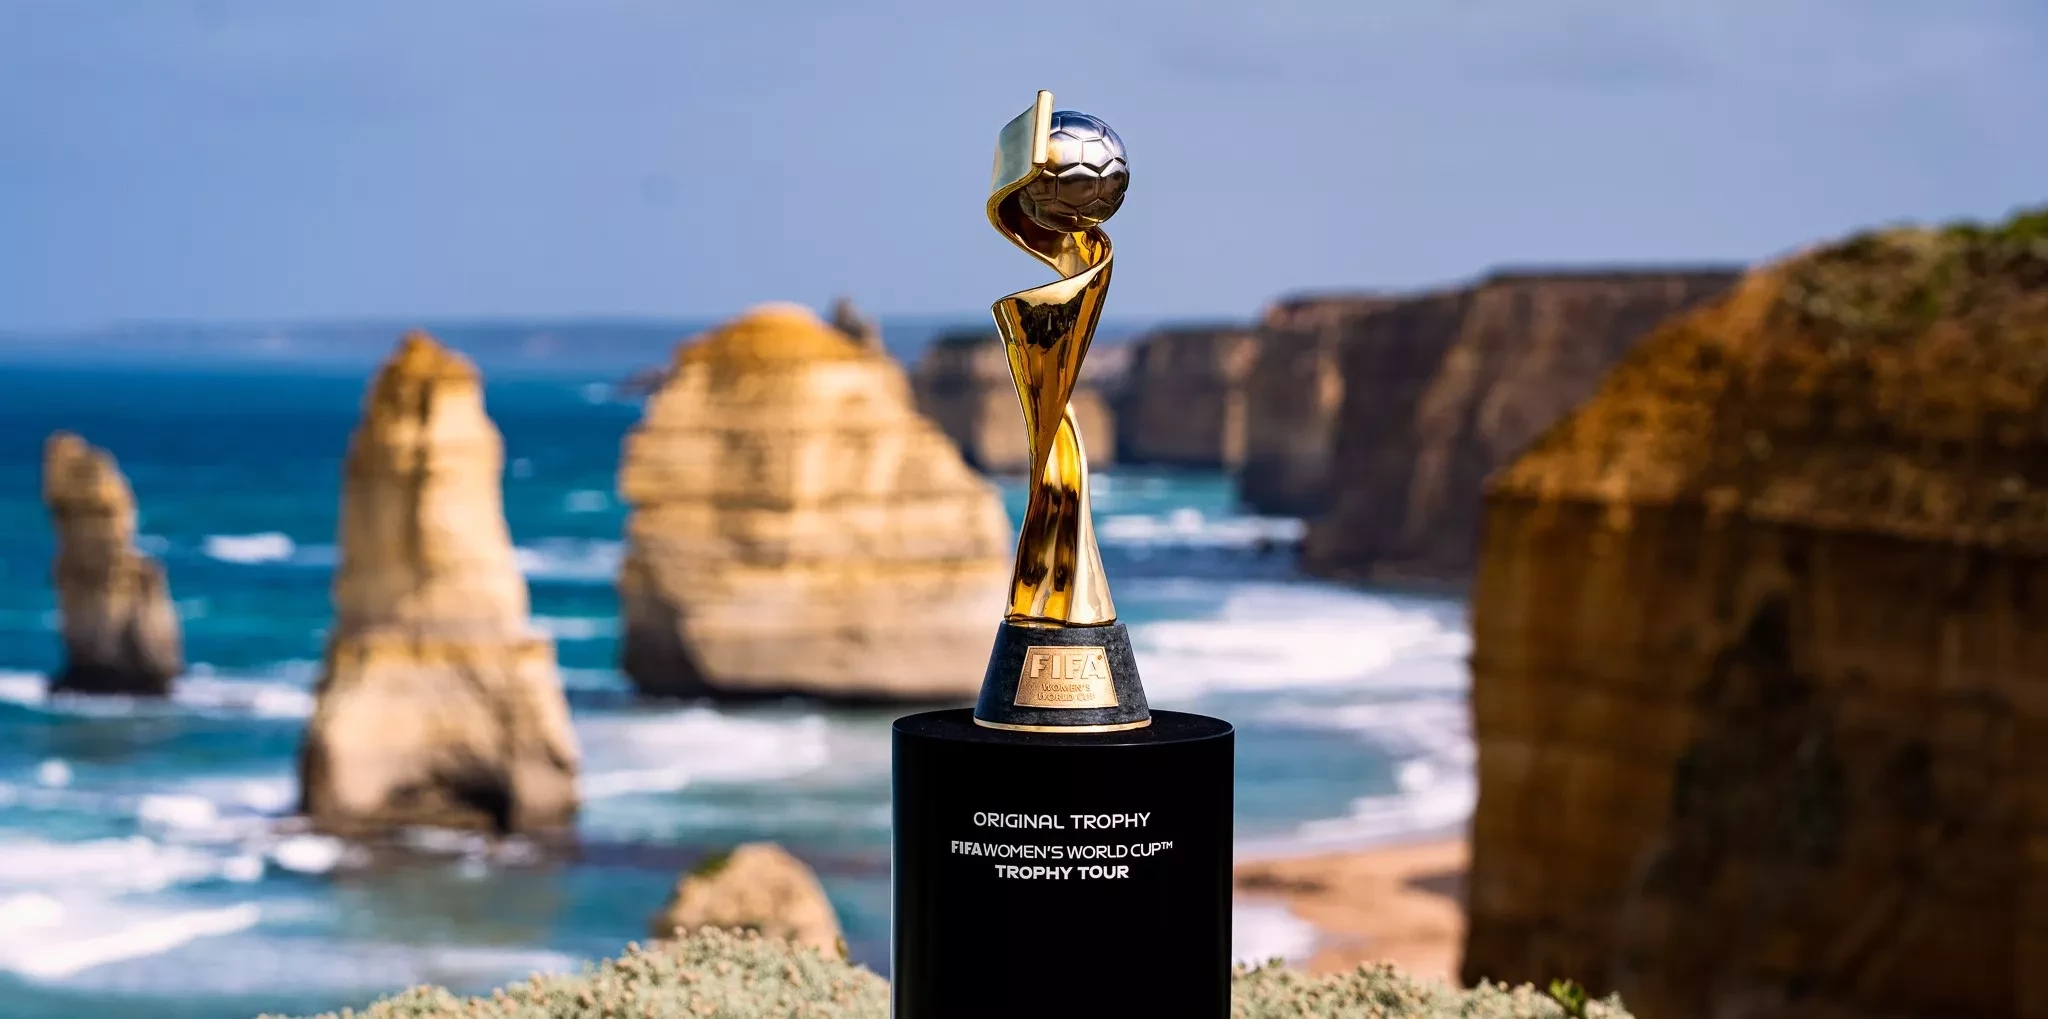 FIFA will have a trophy tour with the theme "Going Beyond" for the 2023 Women's World Cup ©FIFA